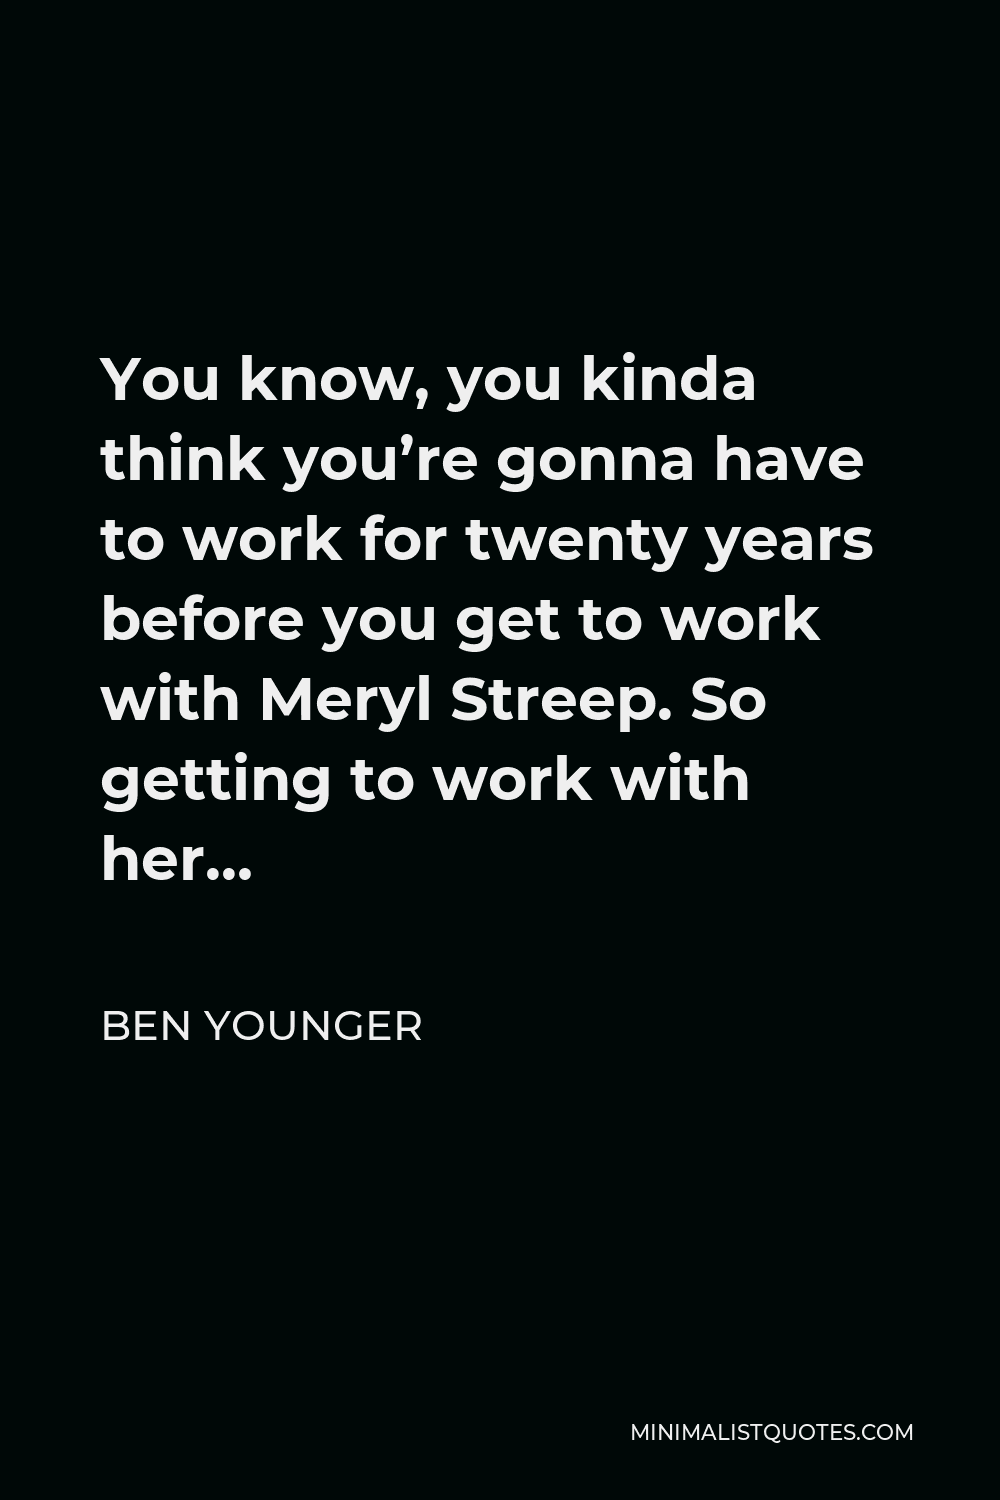 Ben Younger Quote - You know, you kinda think you’re gonna have to work for twenty years before you get to work with Meryl Streep. So getting to work with her…